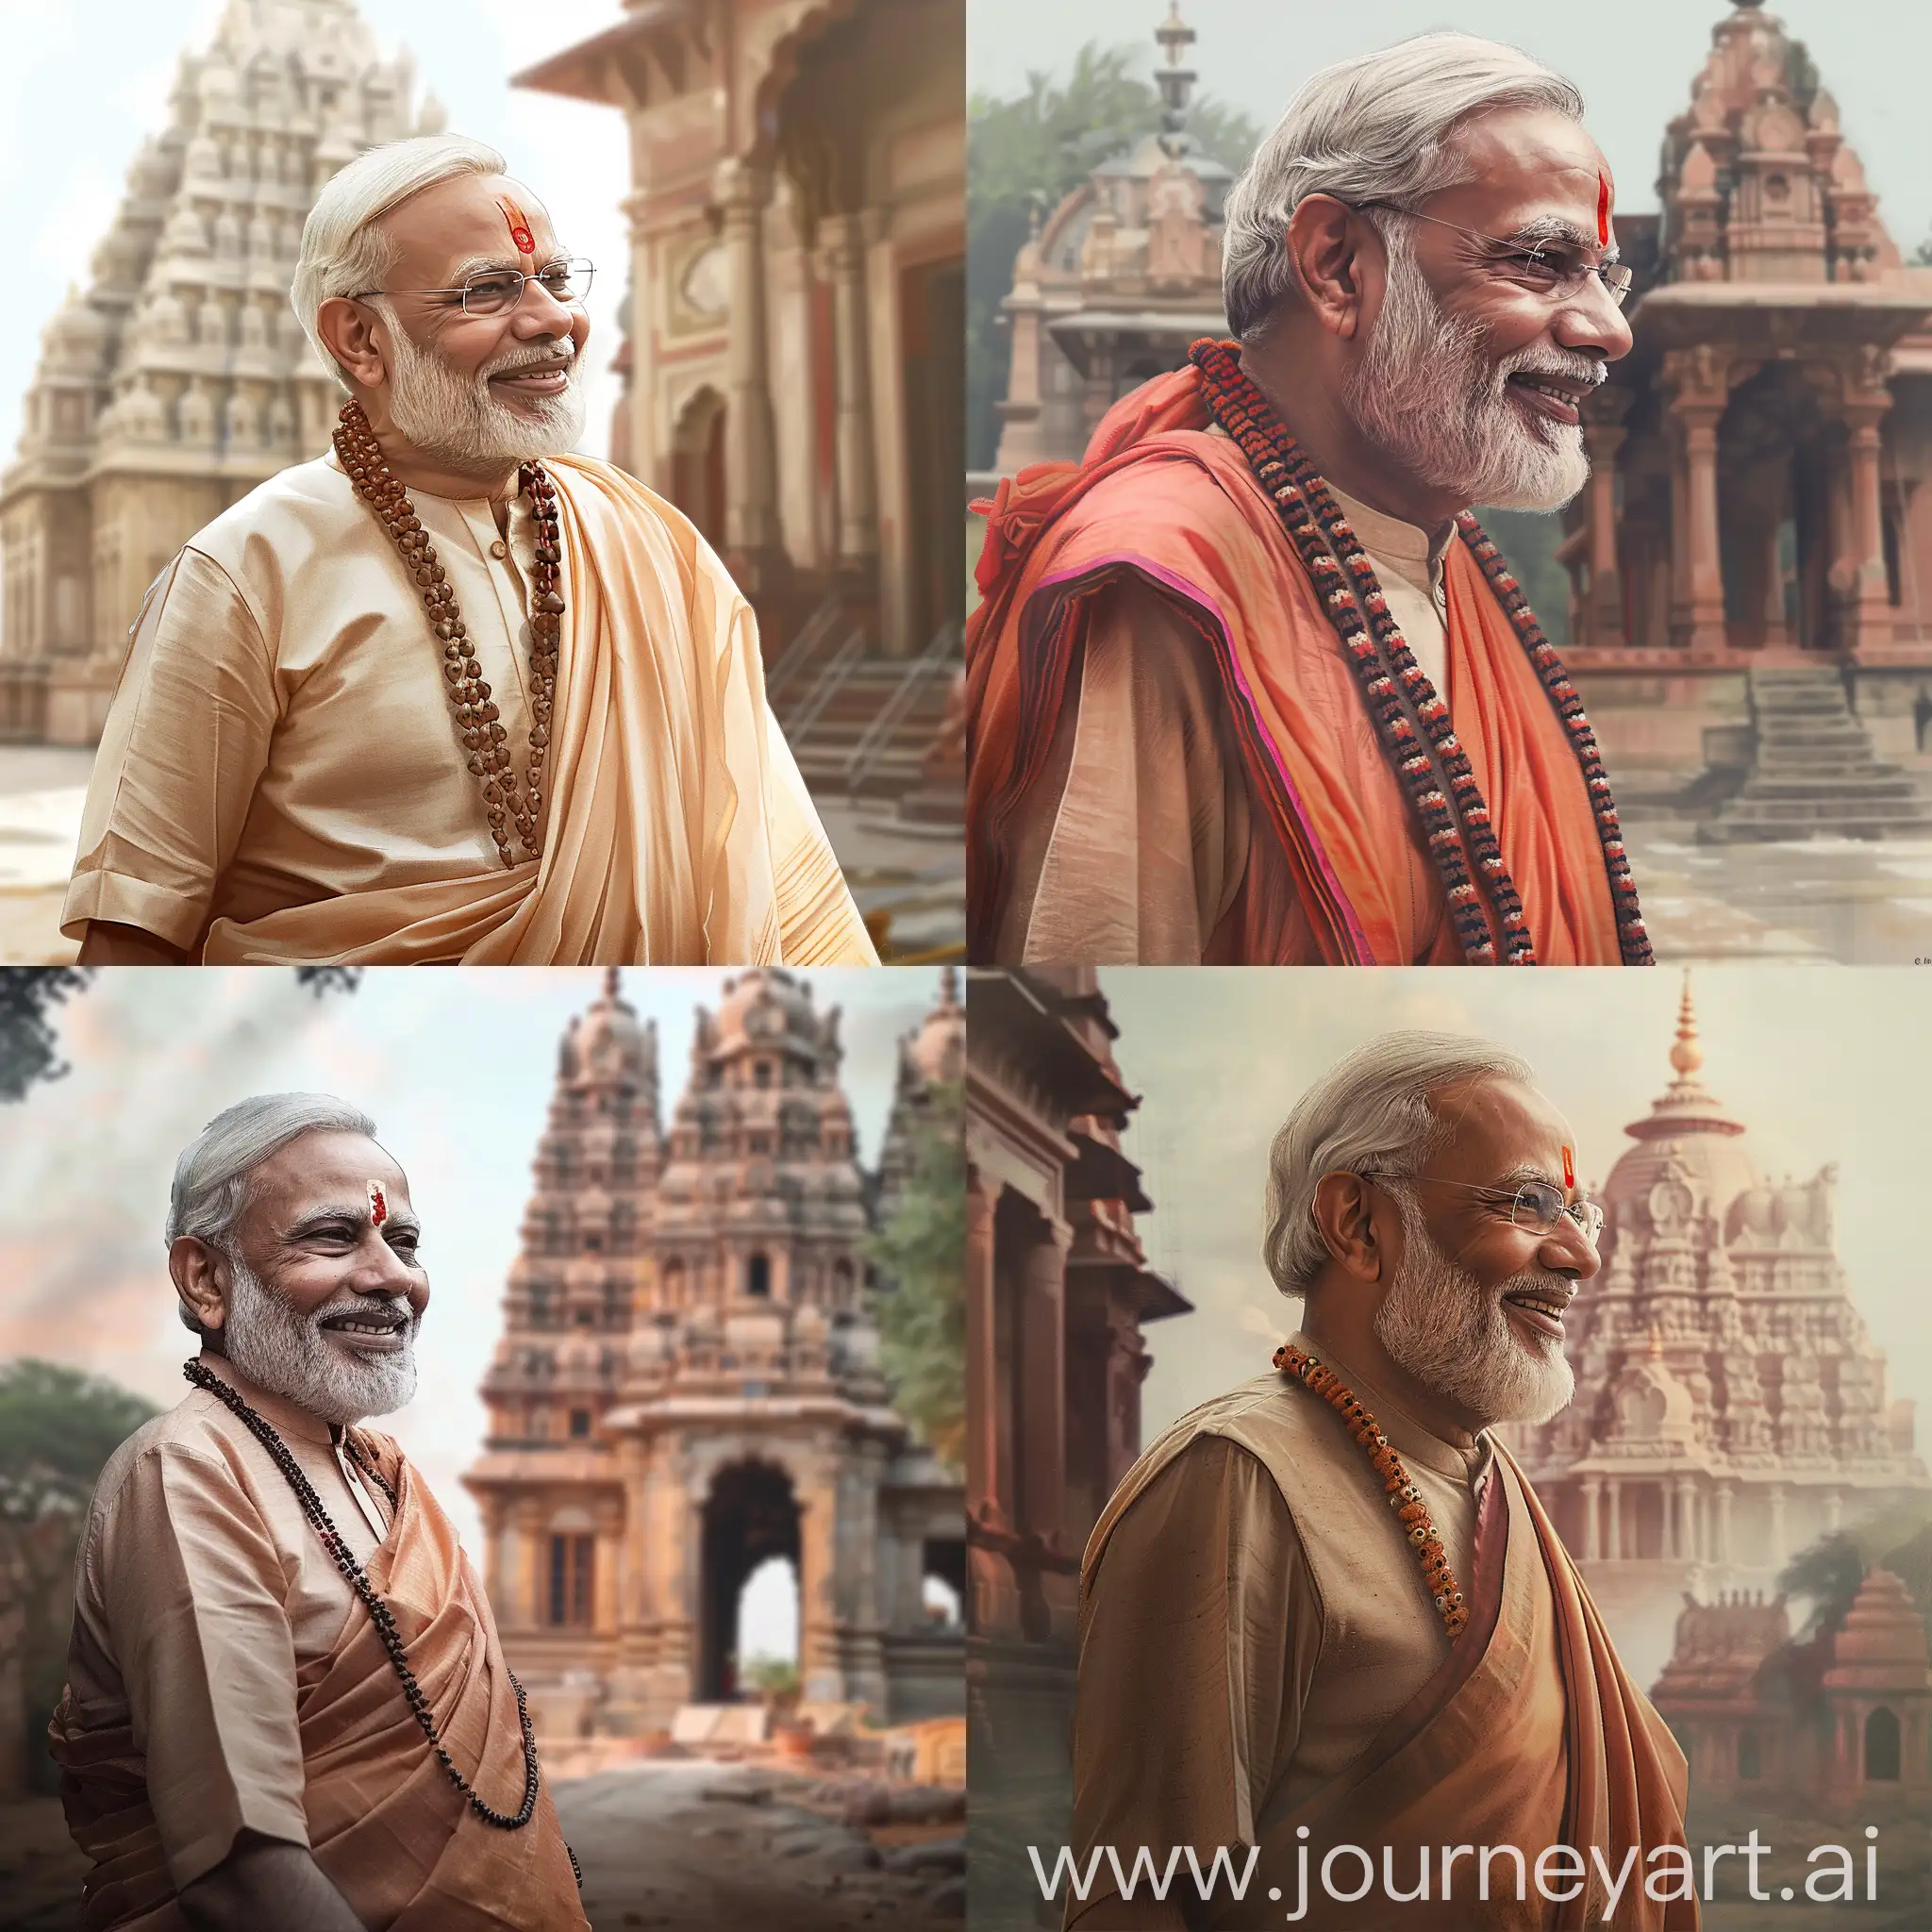 Generate an image of Narendra Modi smiling slightly in a simple Hindu attire like a dhoti and kurta, looking like a saint with sightly longer beard and rudraksh beads. The image must be in a side profile upto the torso. A temple must be in the background. 